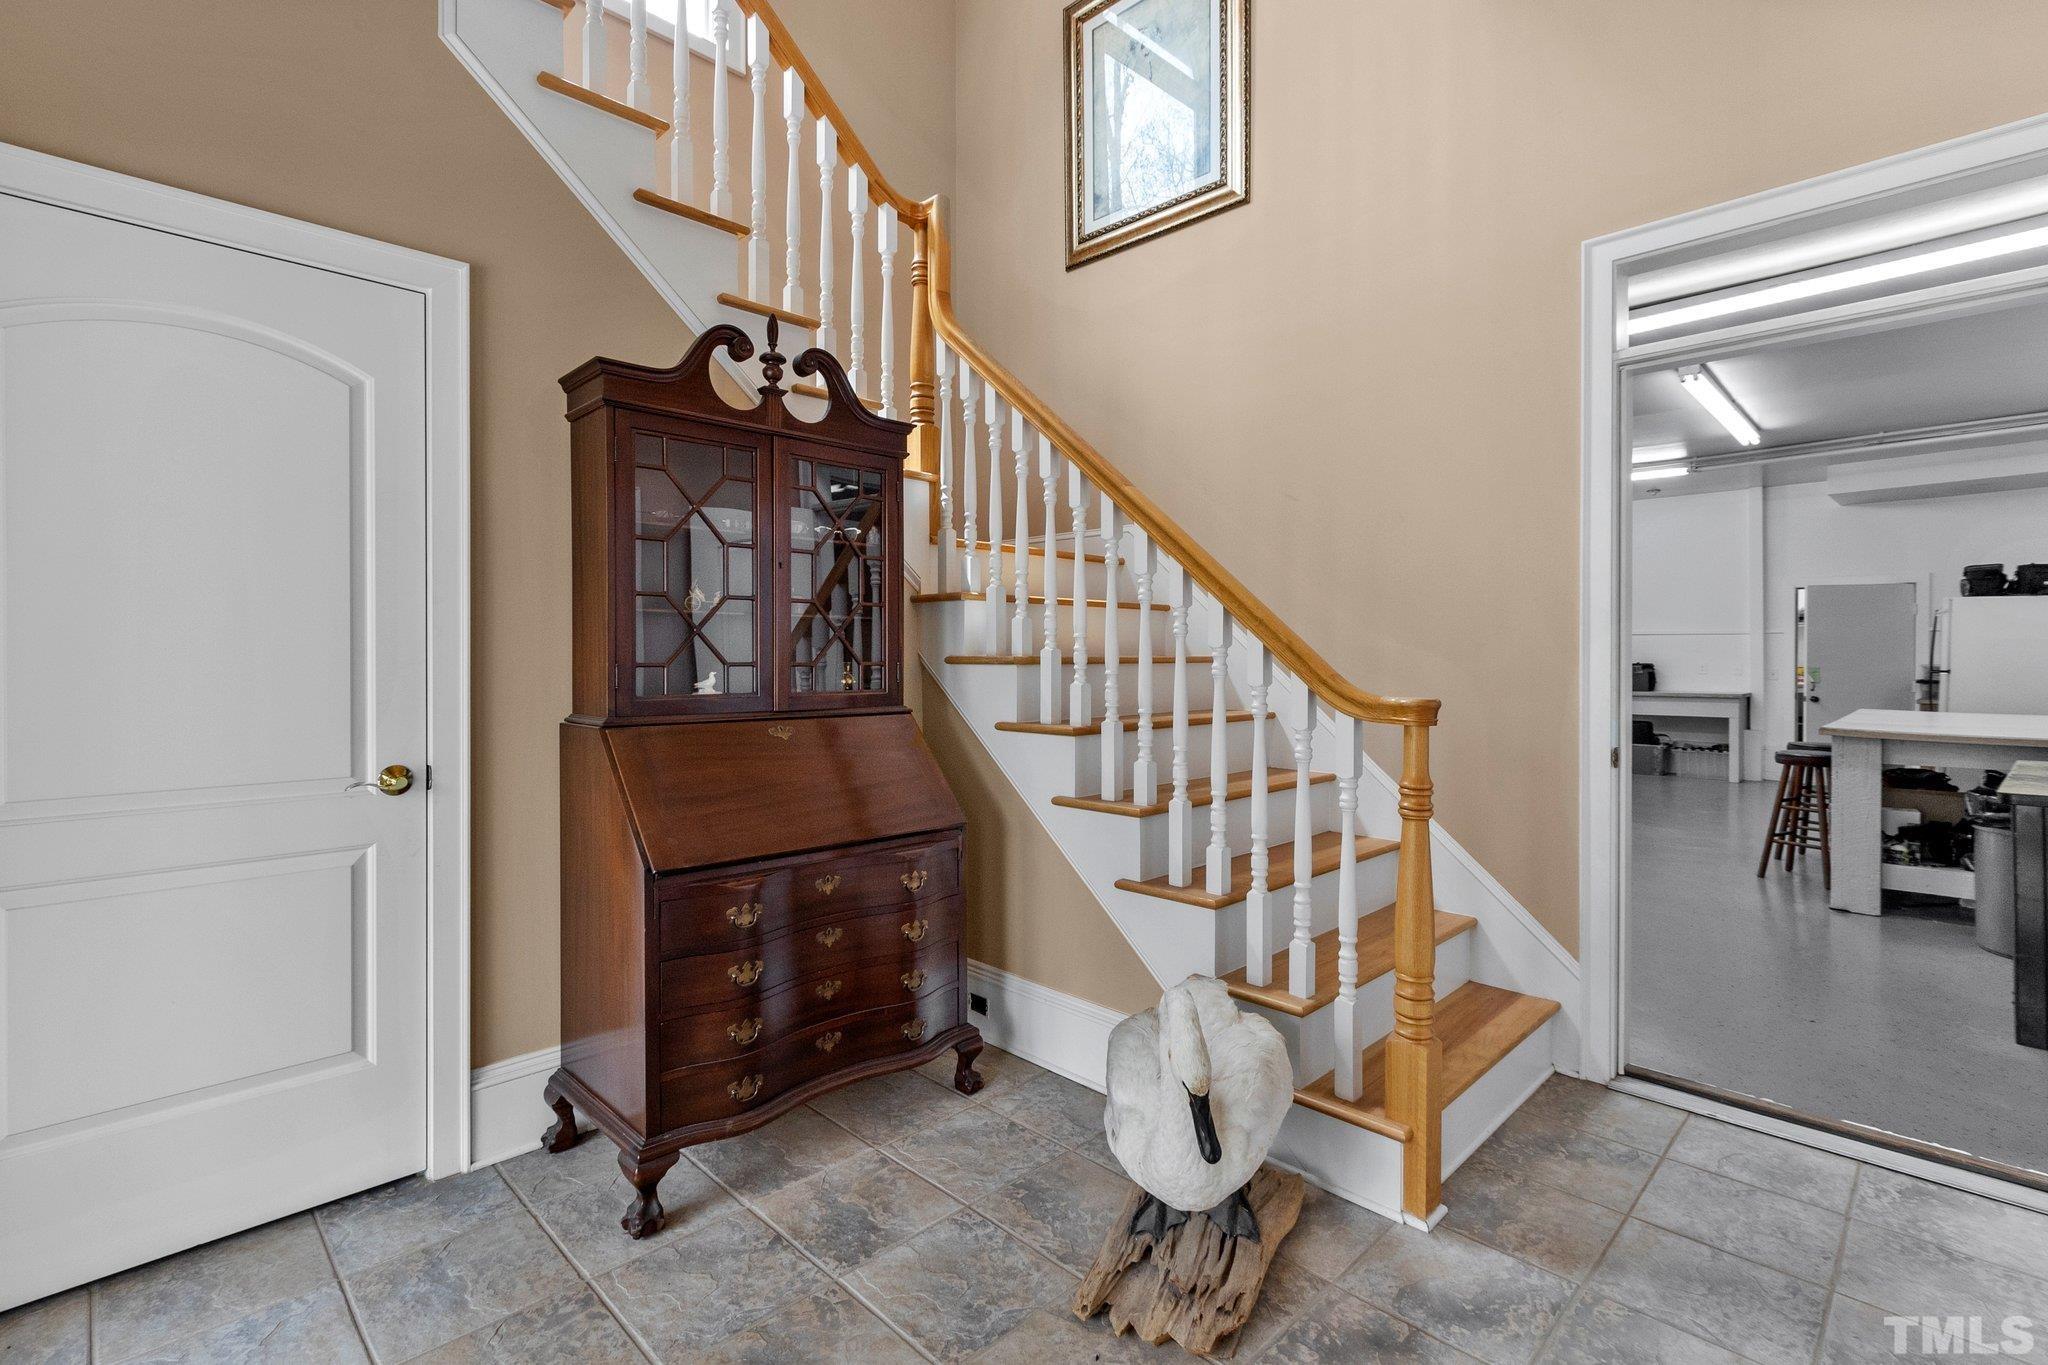 You can take the steps up to the main living area or head into the garages and home offices.